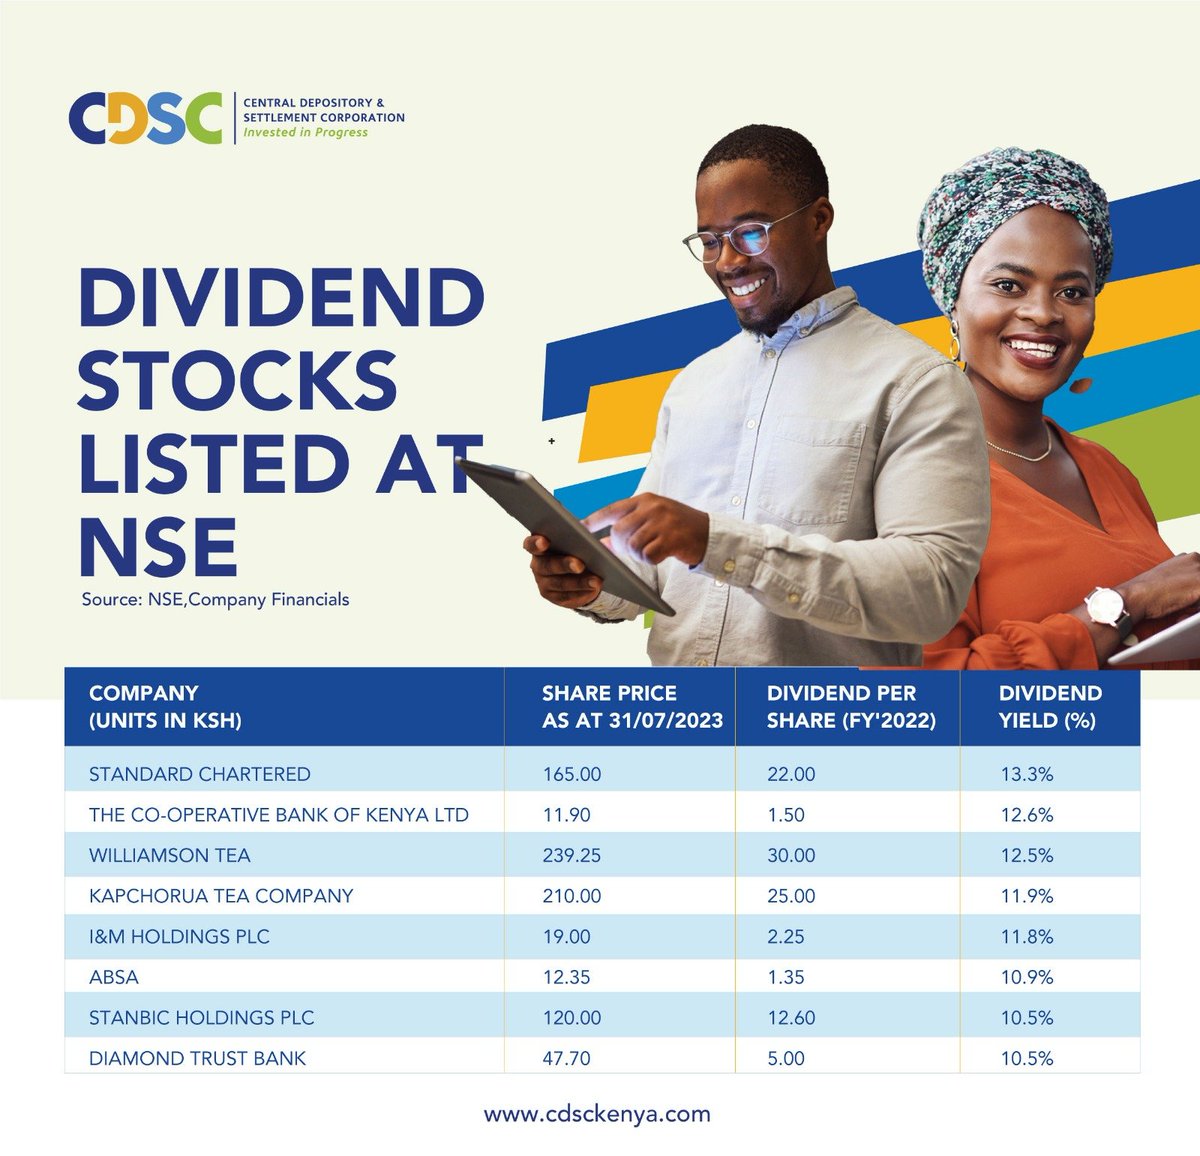 If you're looking for regular income, these stocks paid high dividend income to shareholders in FY 2022:

1.Standard Chartered (SCBK)
2.Co-op Bank (COOP)
3.Williamson Tea Kenya (WTK)
4.Kapchorua Tea Kenya (KAPC)
5.I&M Holdings (IMH)
6.Stanbic (SBIC)
7.DTB (DTK)
8.ABSA Kenya…